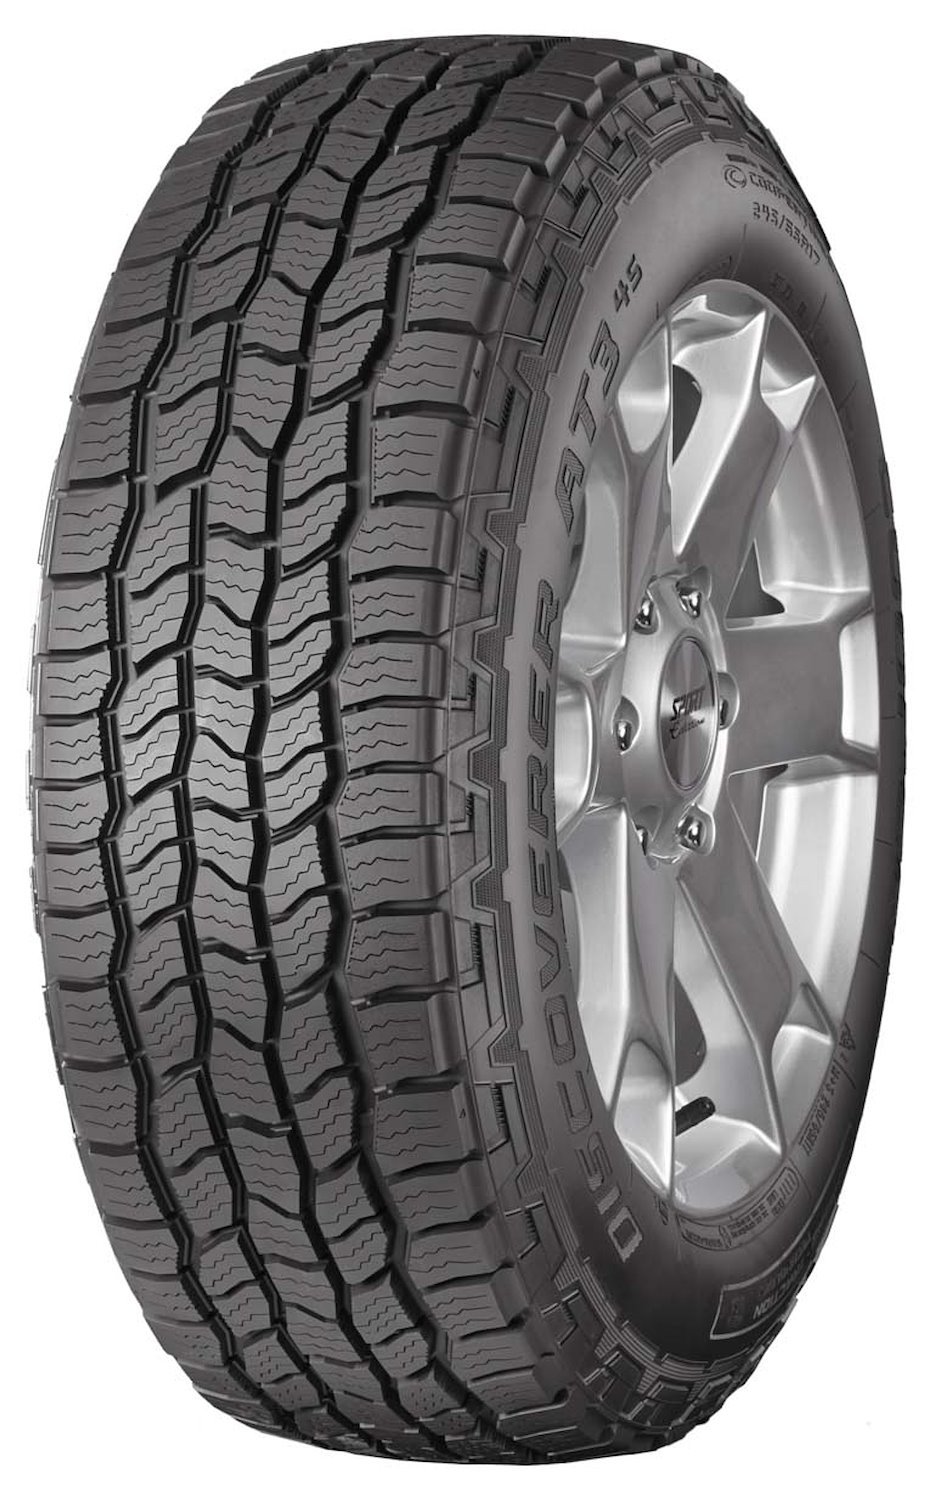 Discoverer AT3 4S All-Terrain Tire, 245/65R17